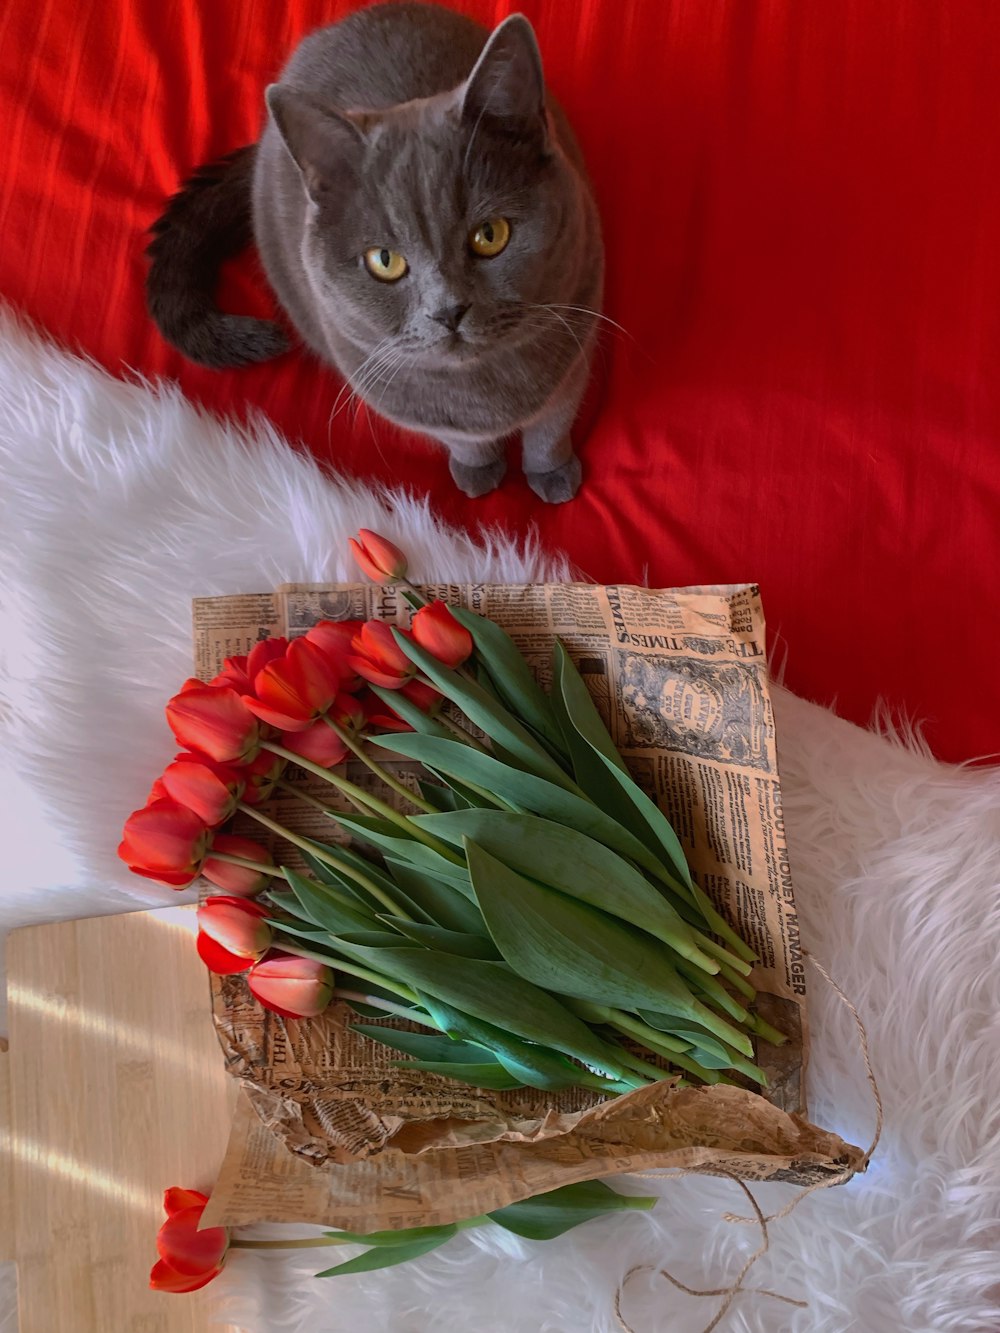 a cat sitting next to a bunch of red tulips